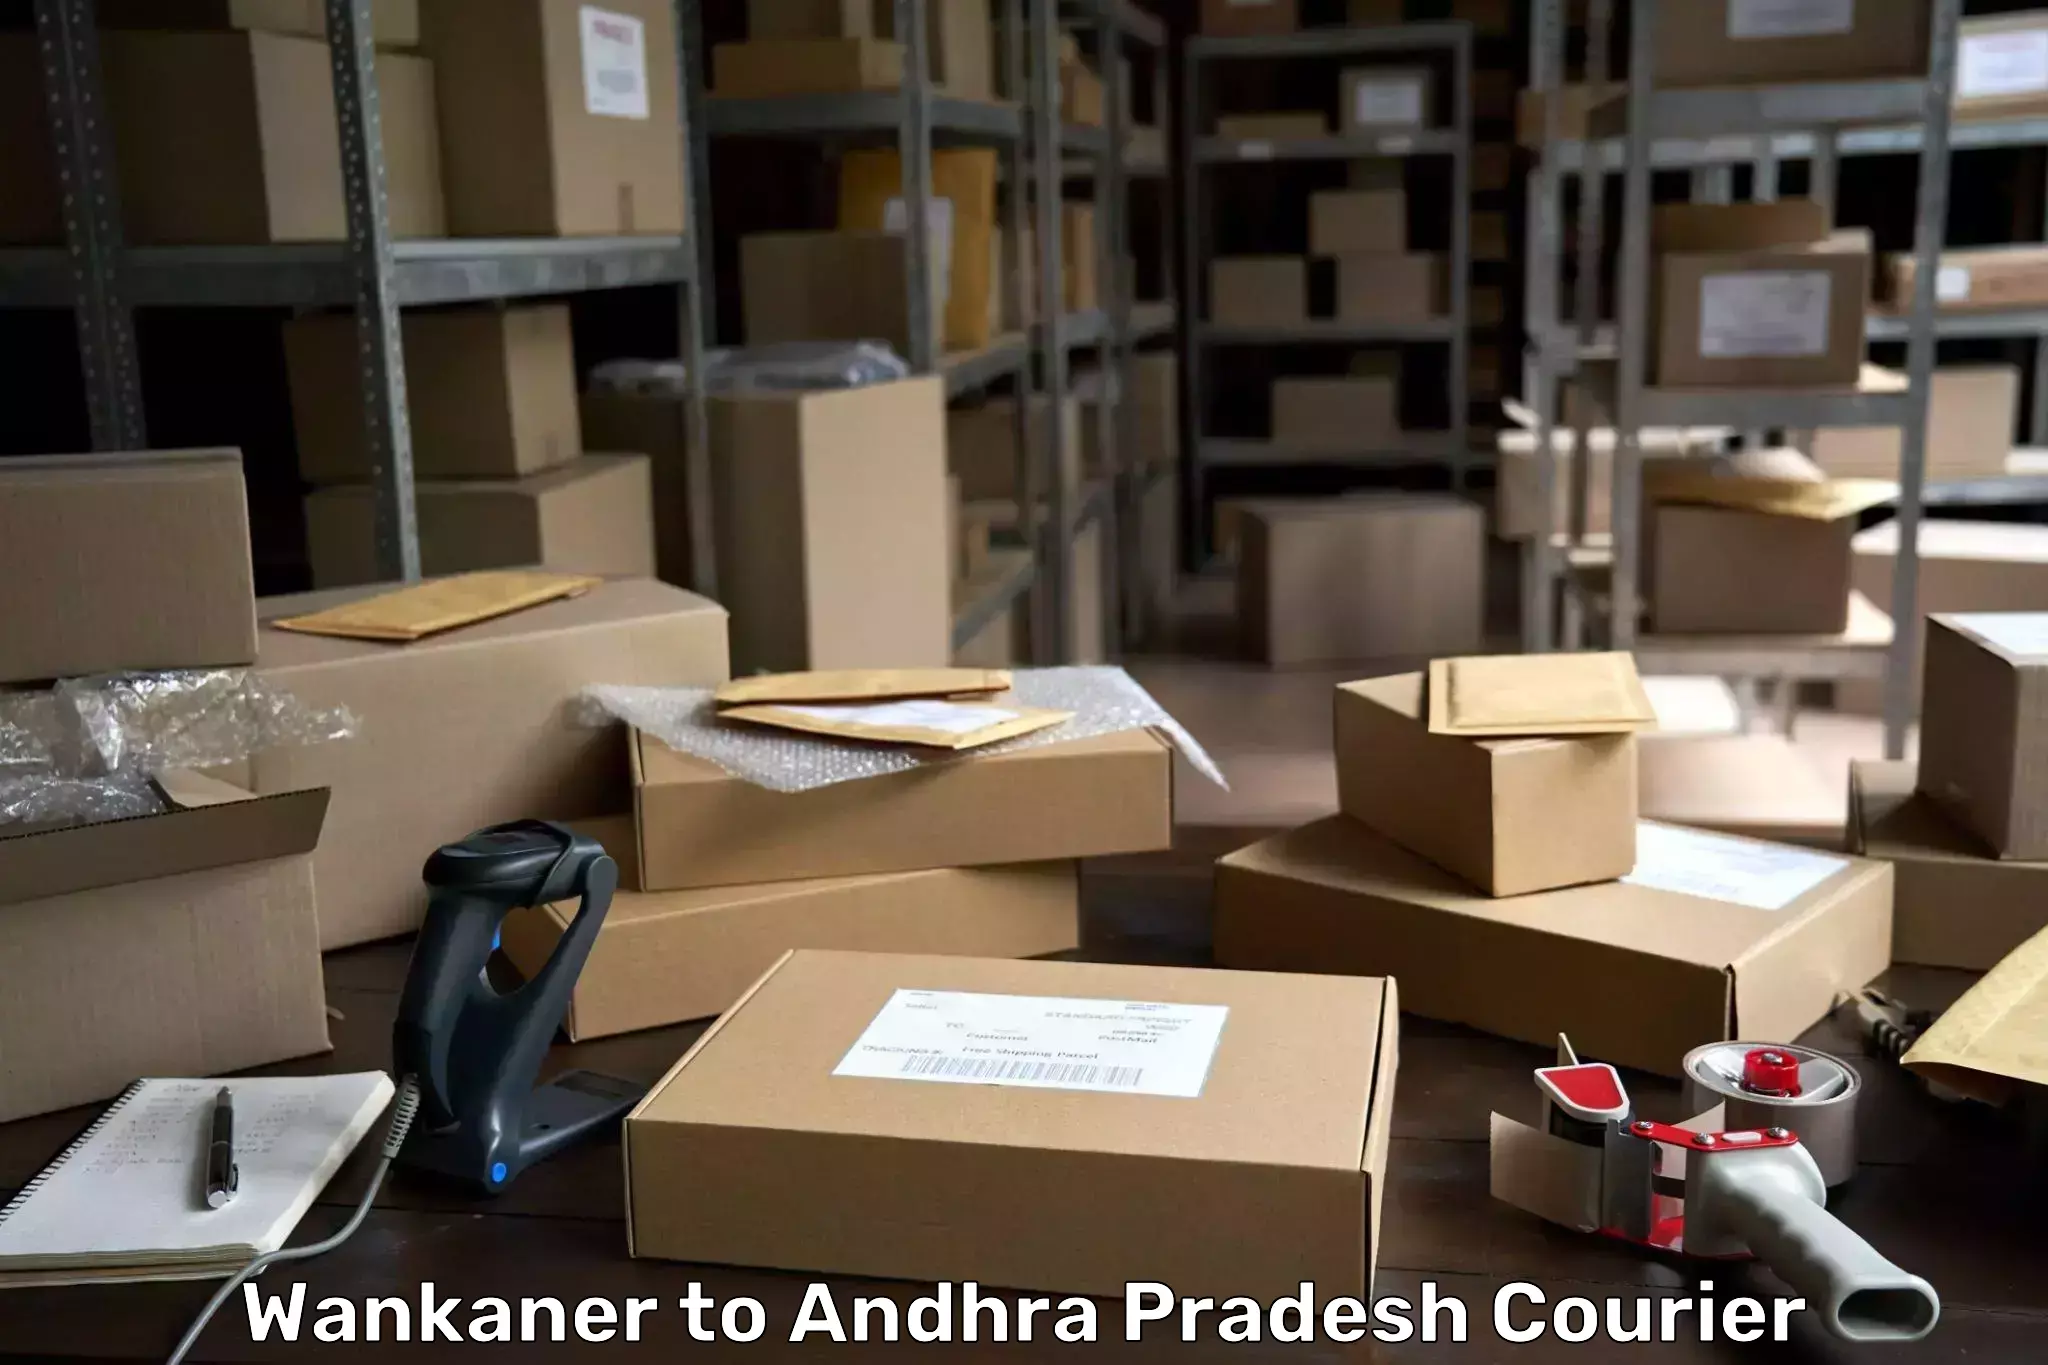 Customer-oriented courier services Wankaner to Visakhapatnam Port